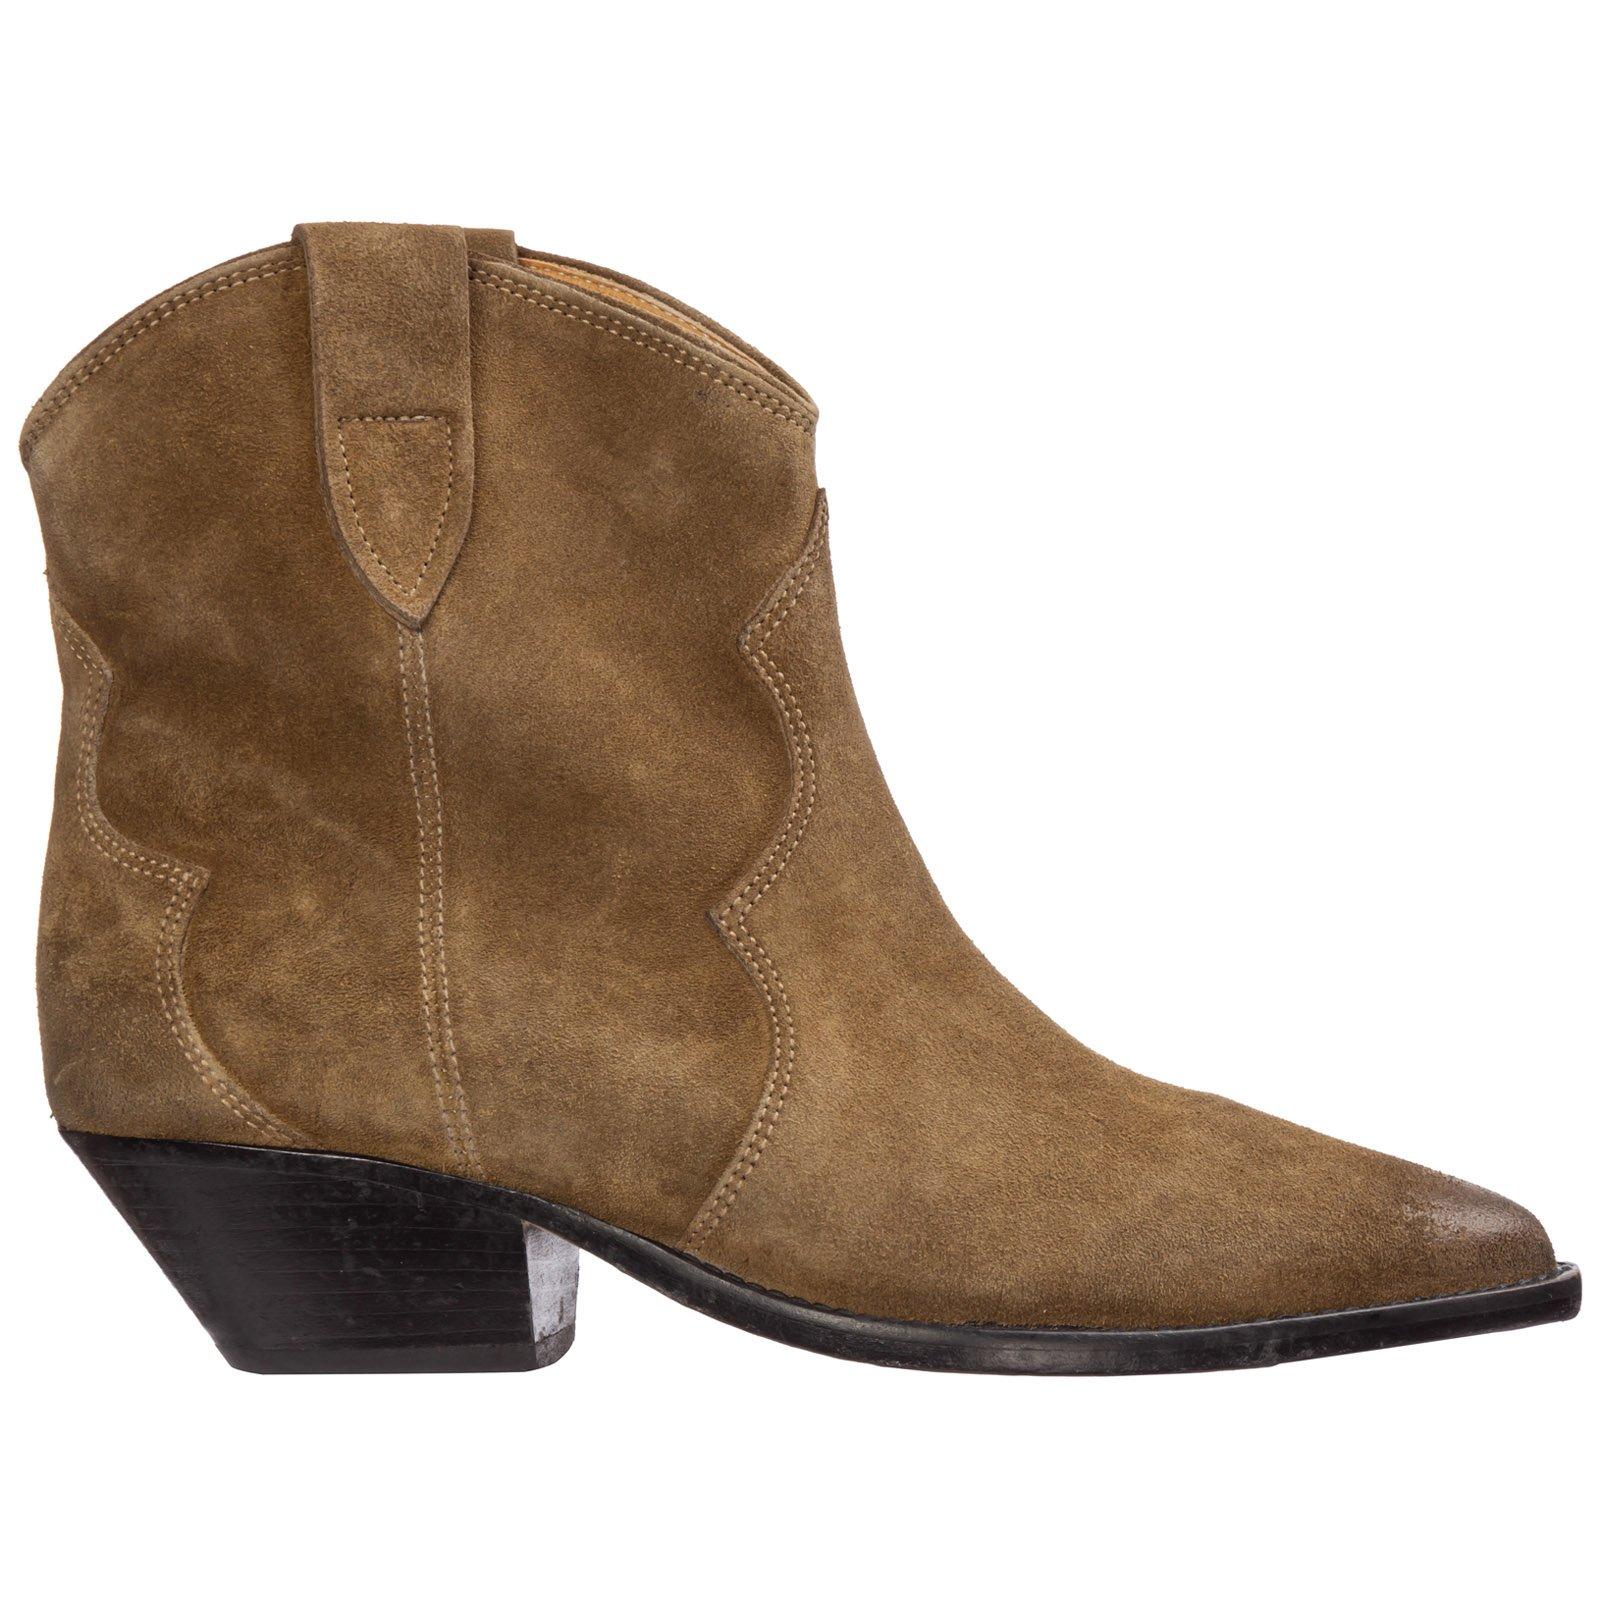 Isabel Marant Leather Dewina Ankle Boots in Brown - Lyst